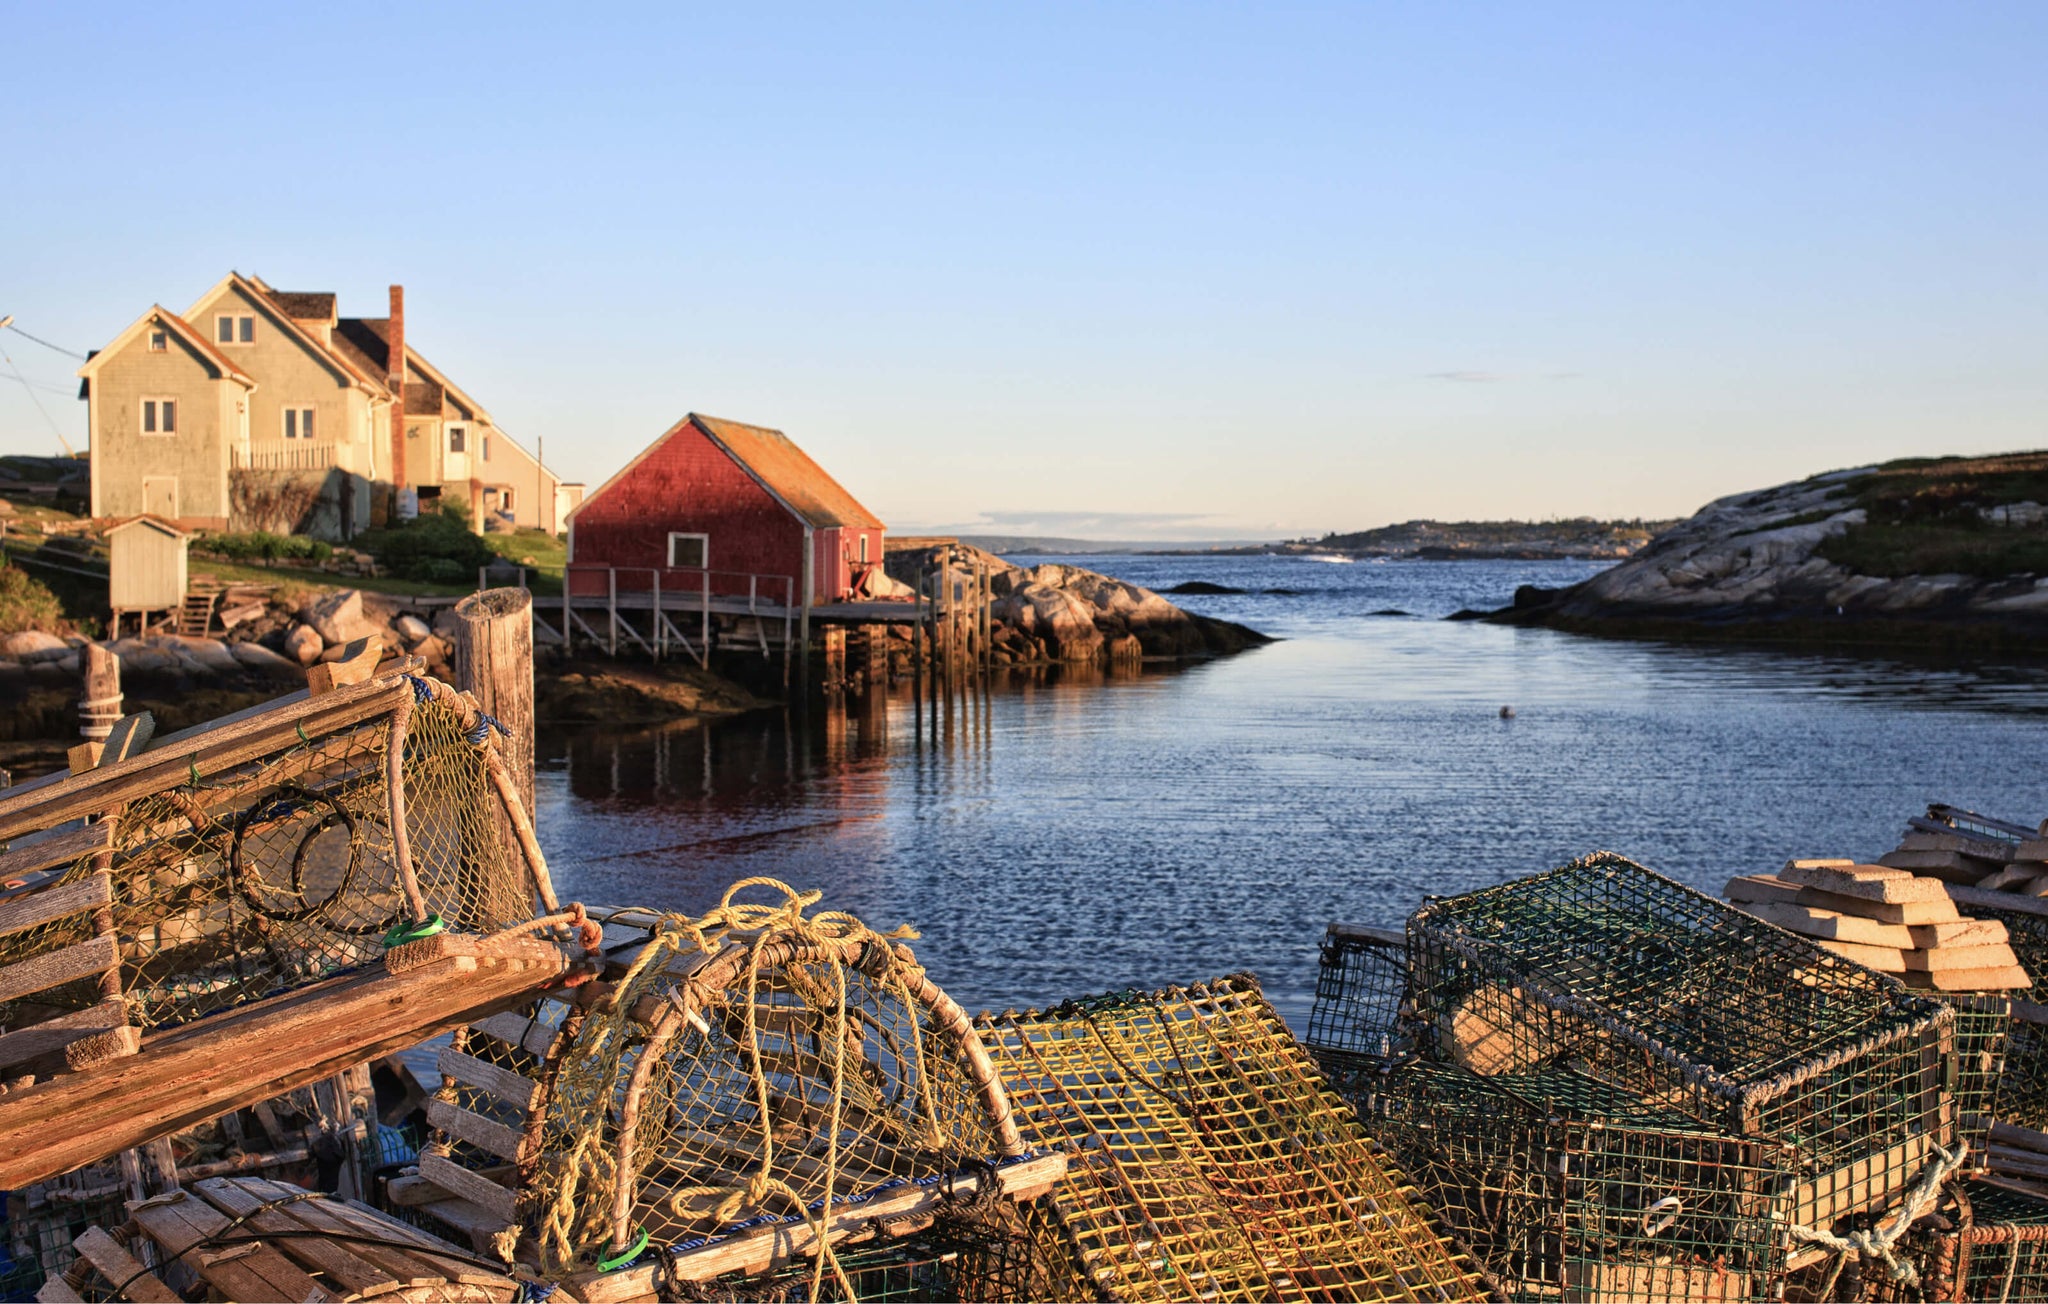 Stunning ocean view with lobster traps under a soft blue sky